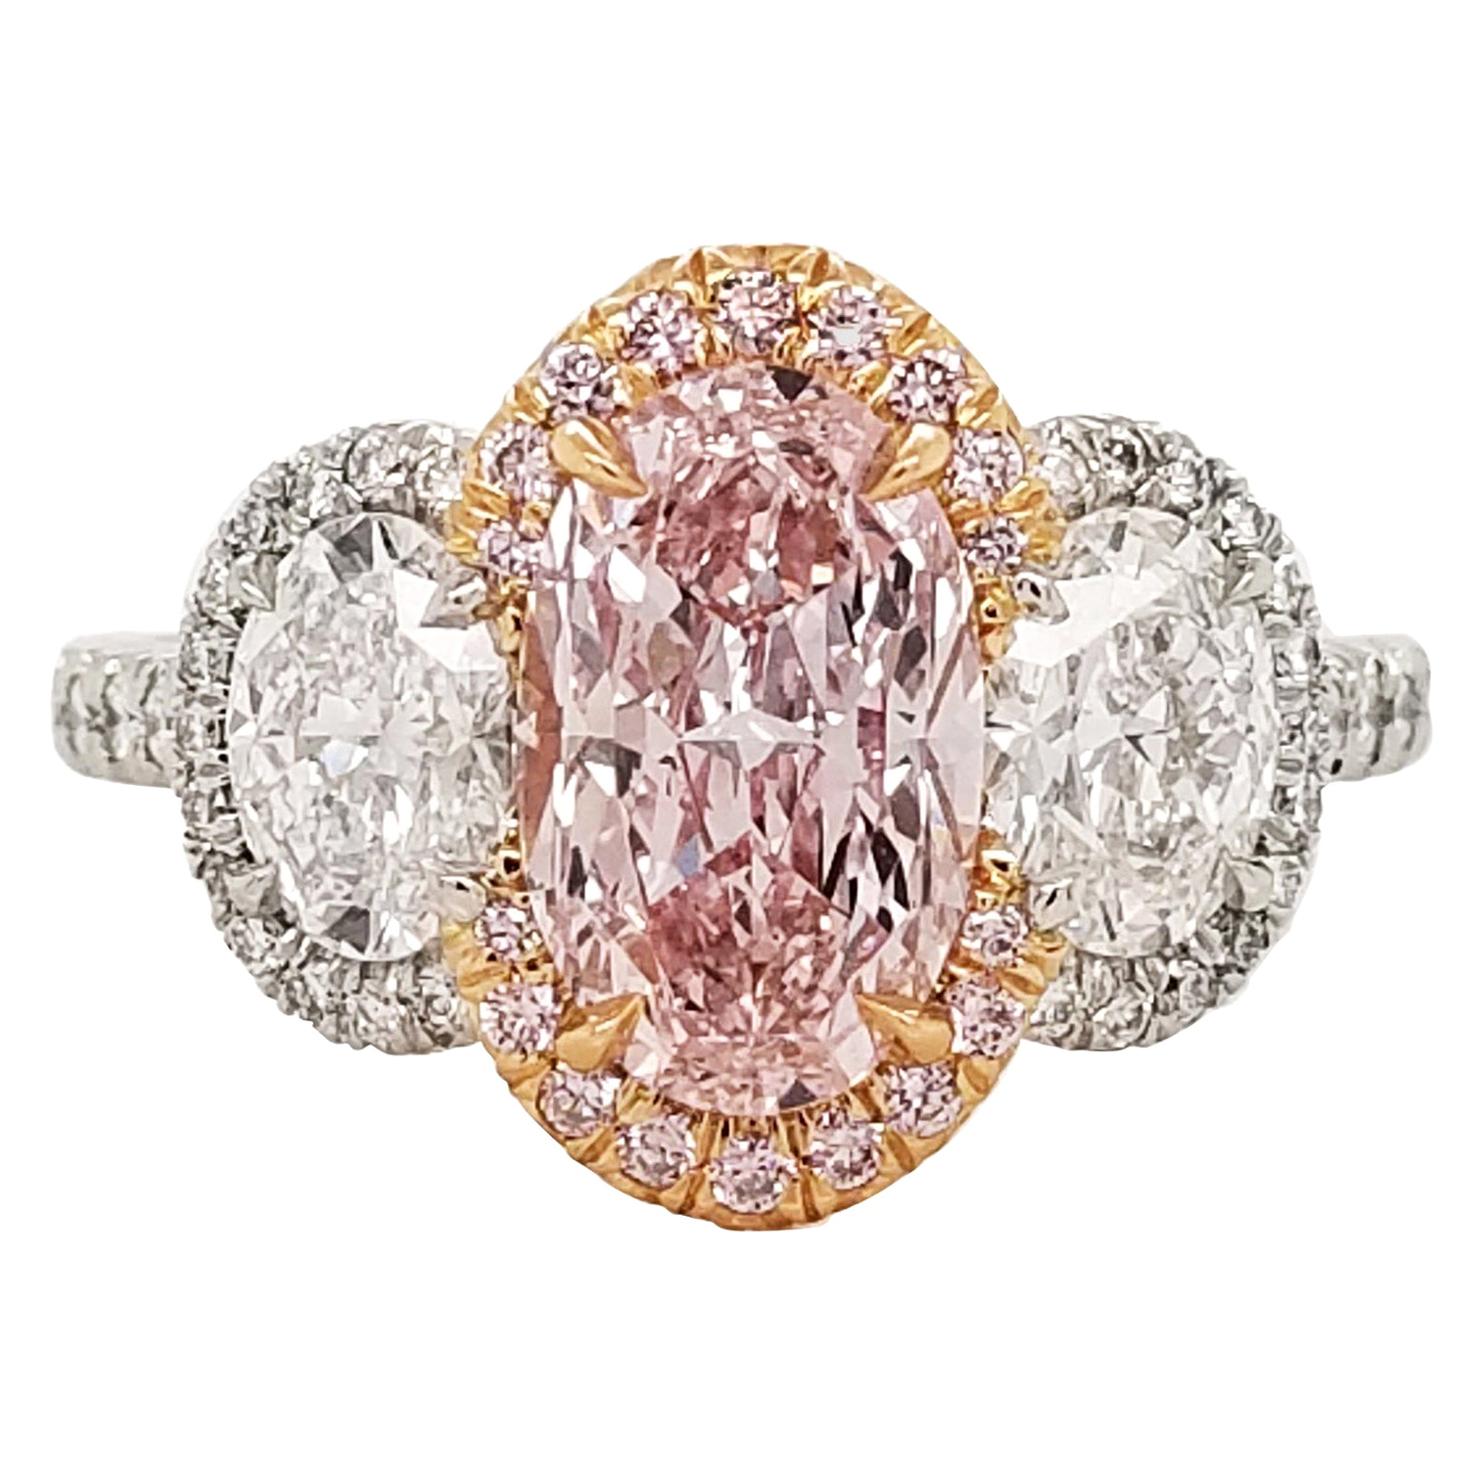 Scarselli 1.50 Carat Fancy Pink Oval Diamond Ring in Platinum and 18 Karat  Gold For Sale at 1stDibs